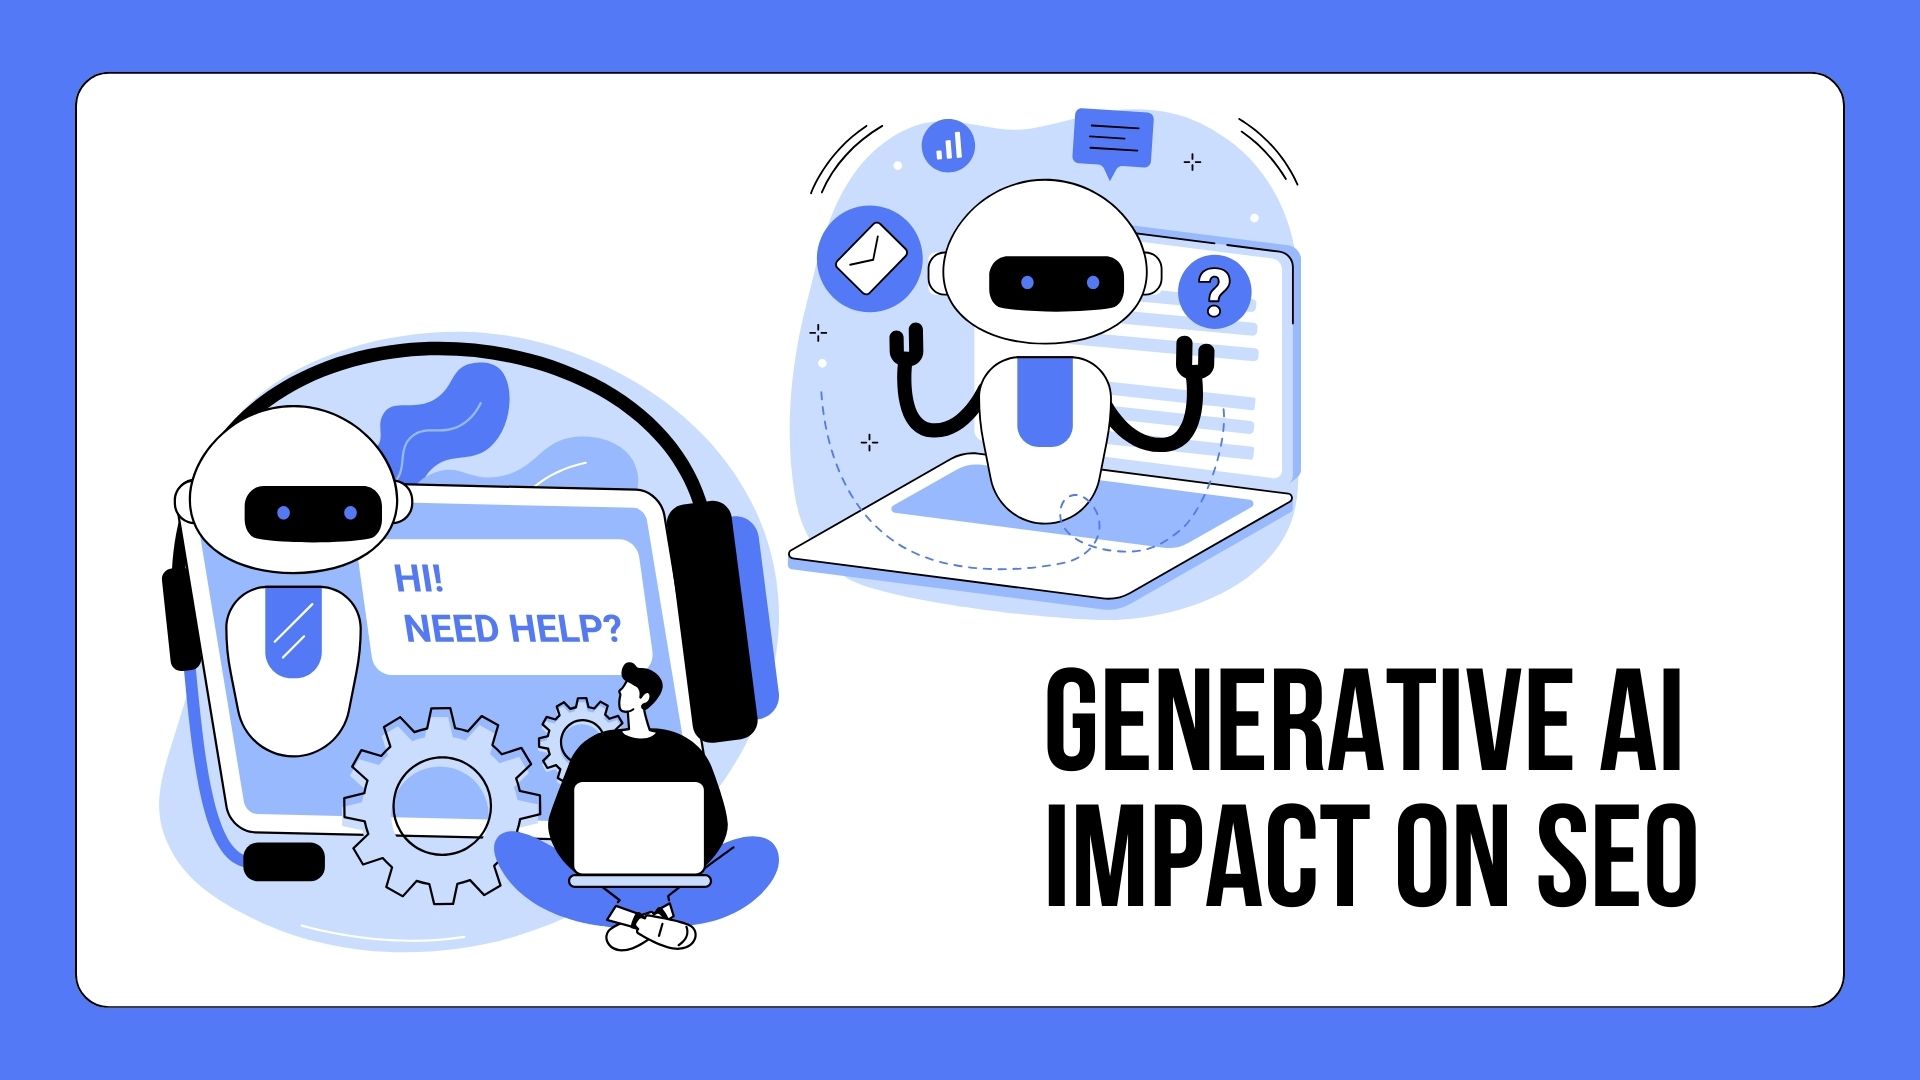 How Will Generative AI Impact Website Design And Search Engine Optimization (SEO)?